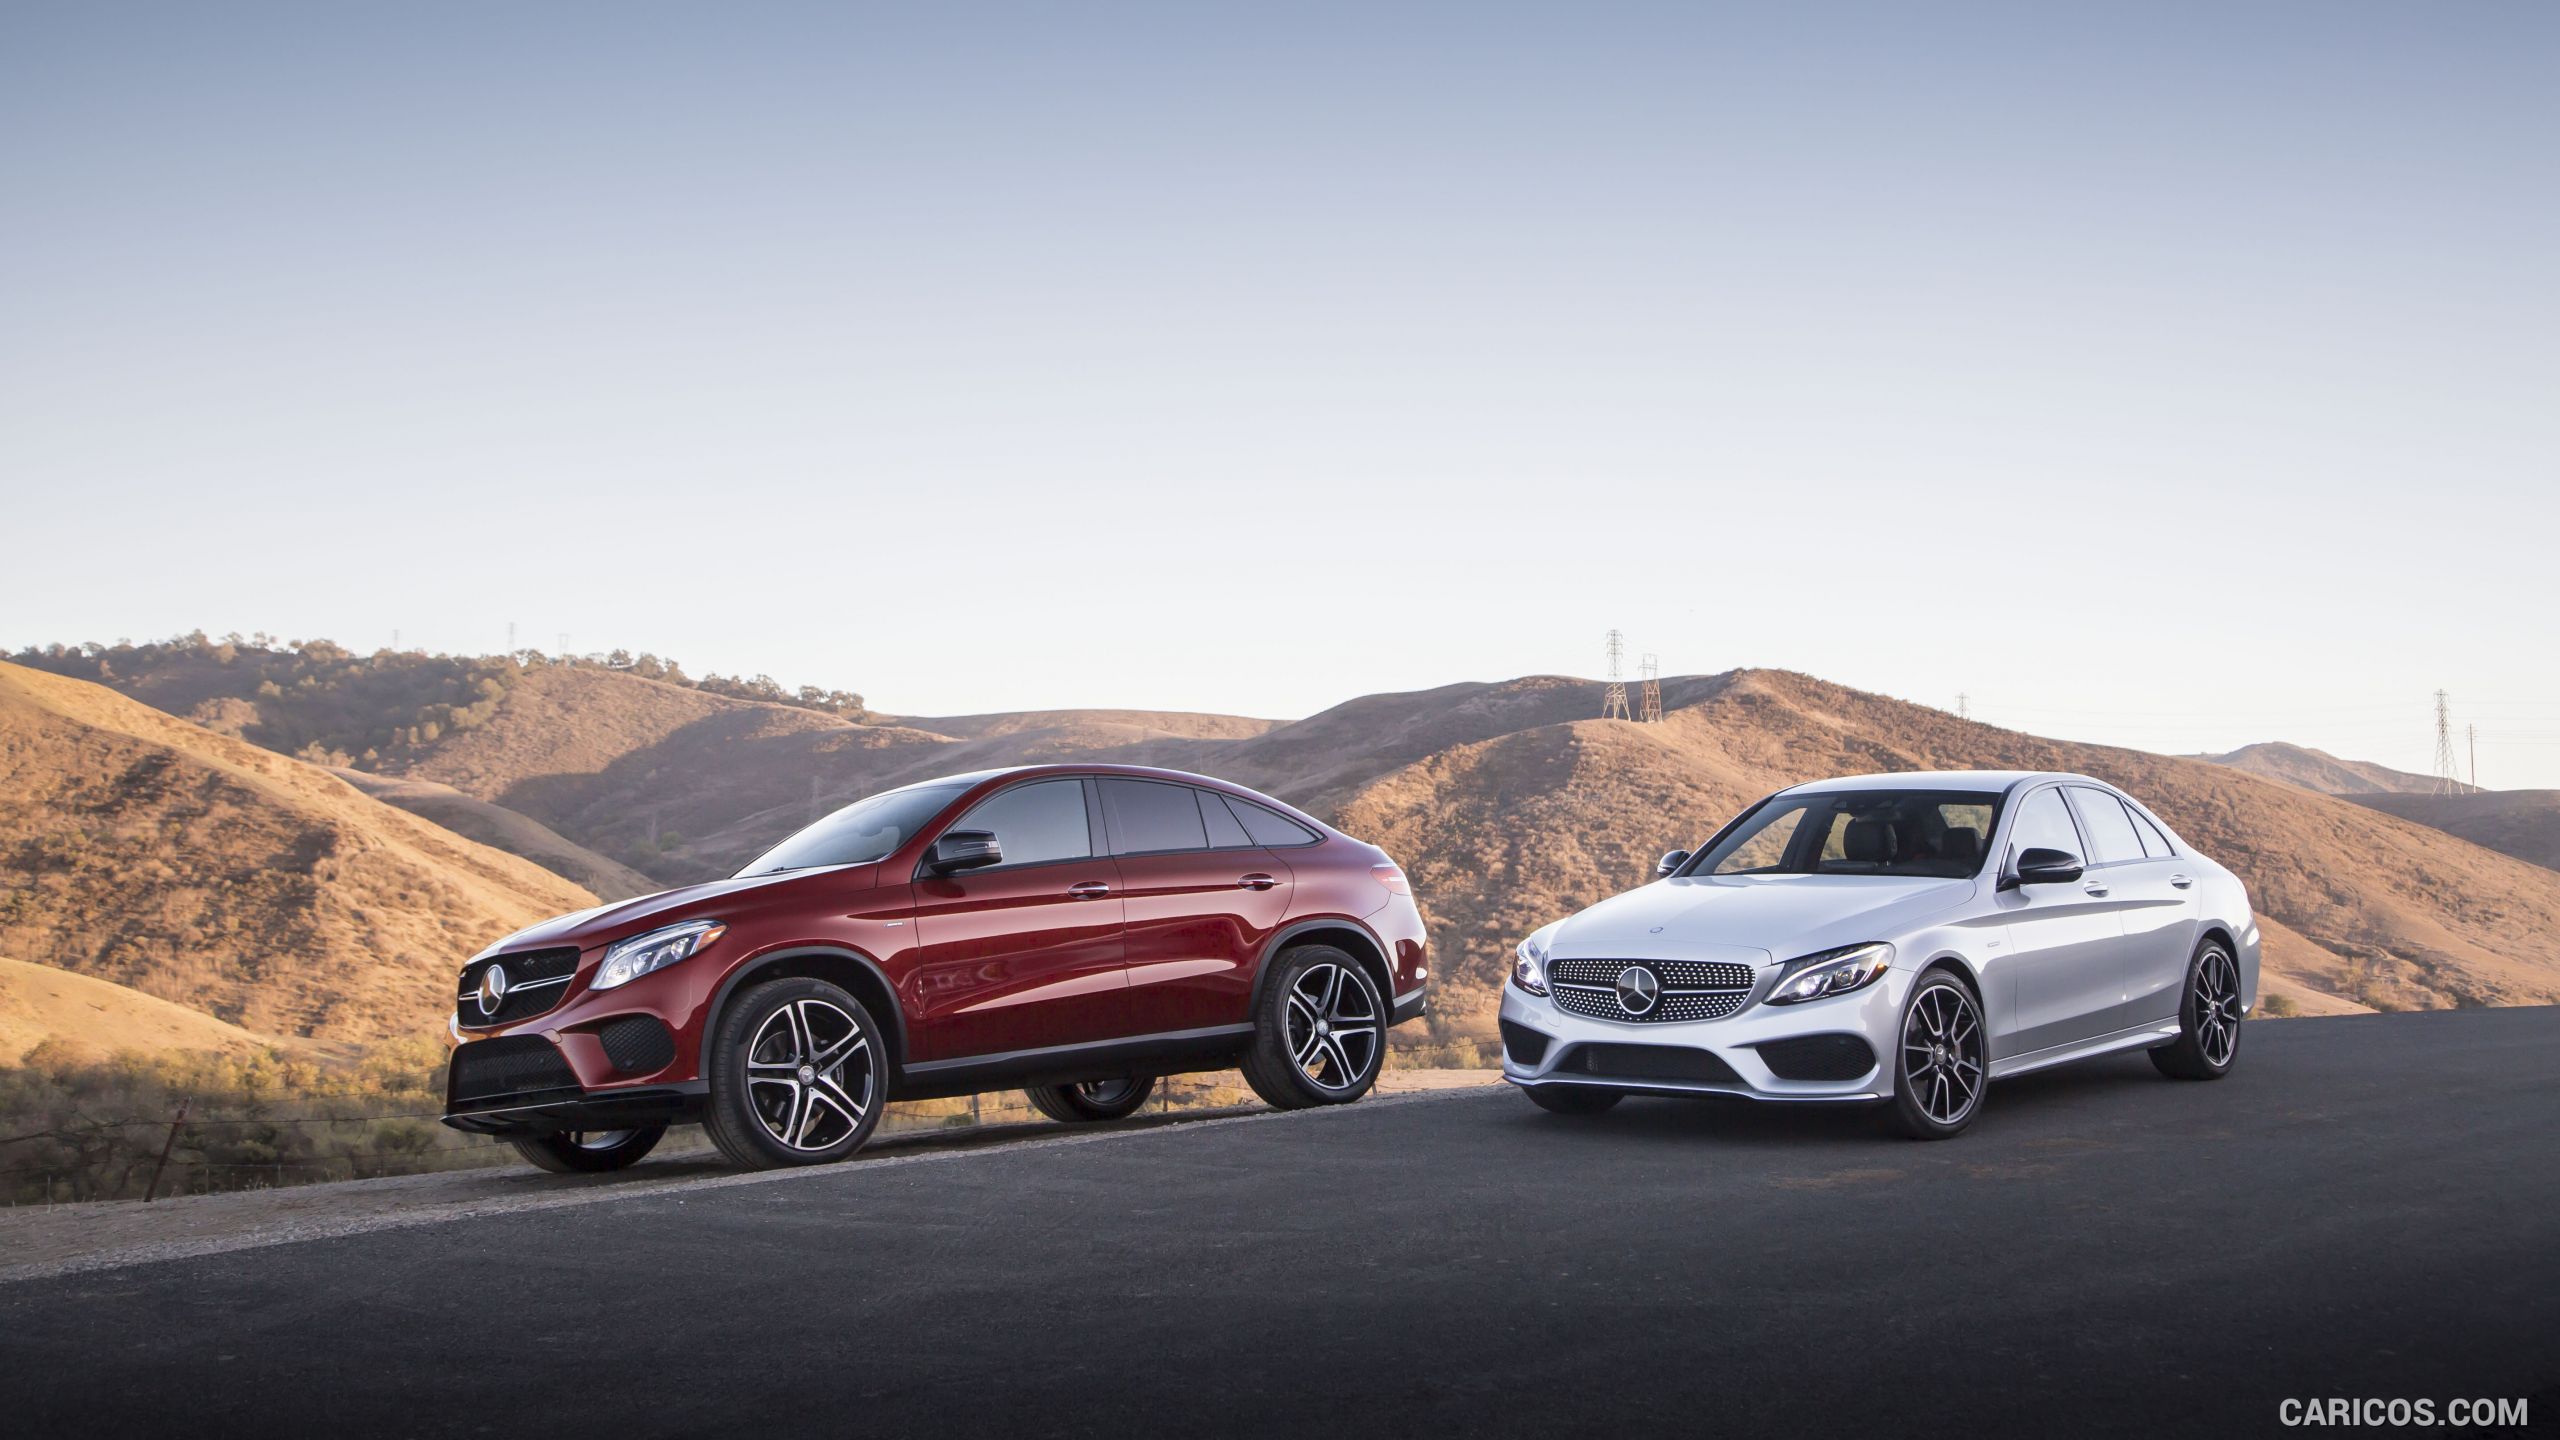 2016 Mercedes-Benz C450 AMG Sedan (US-Spec) and Mercedes-Benz GLE 450 AMG Coupe - Front, #85 of 122